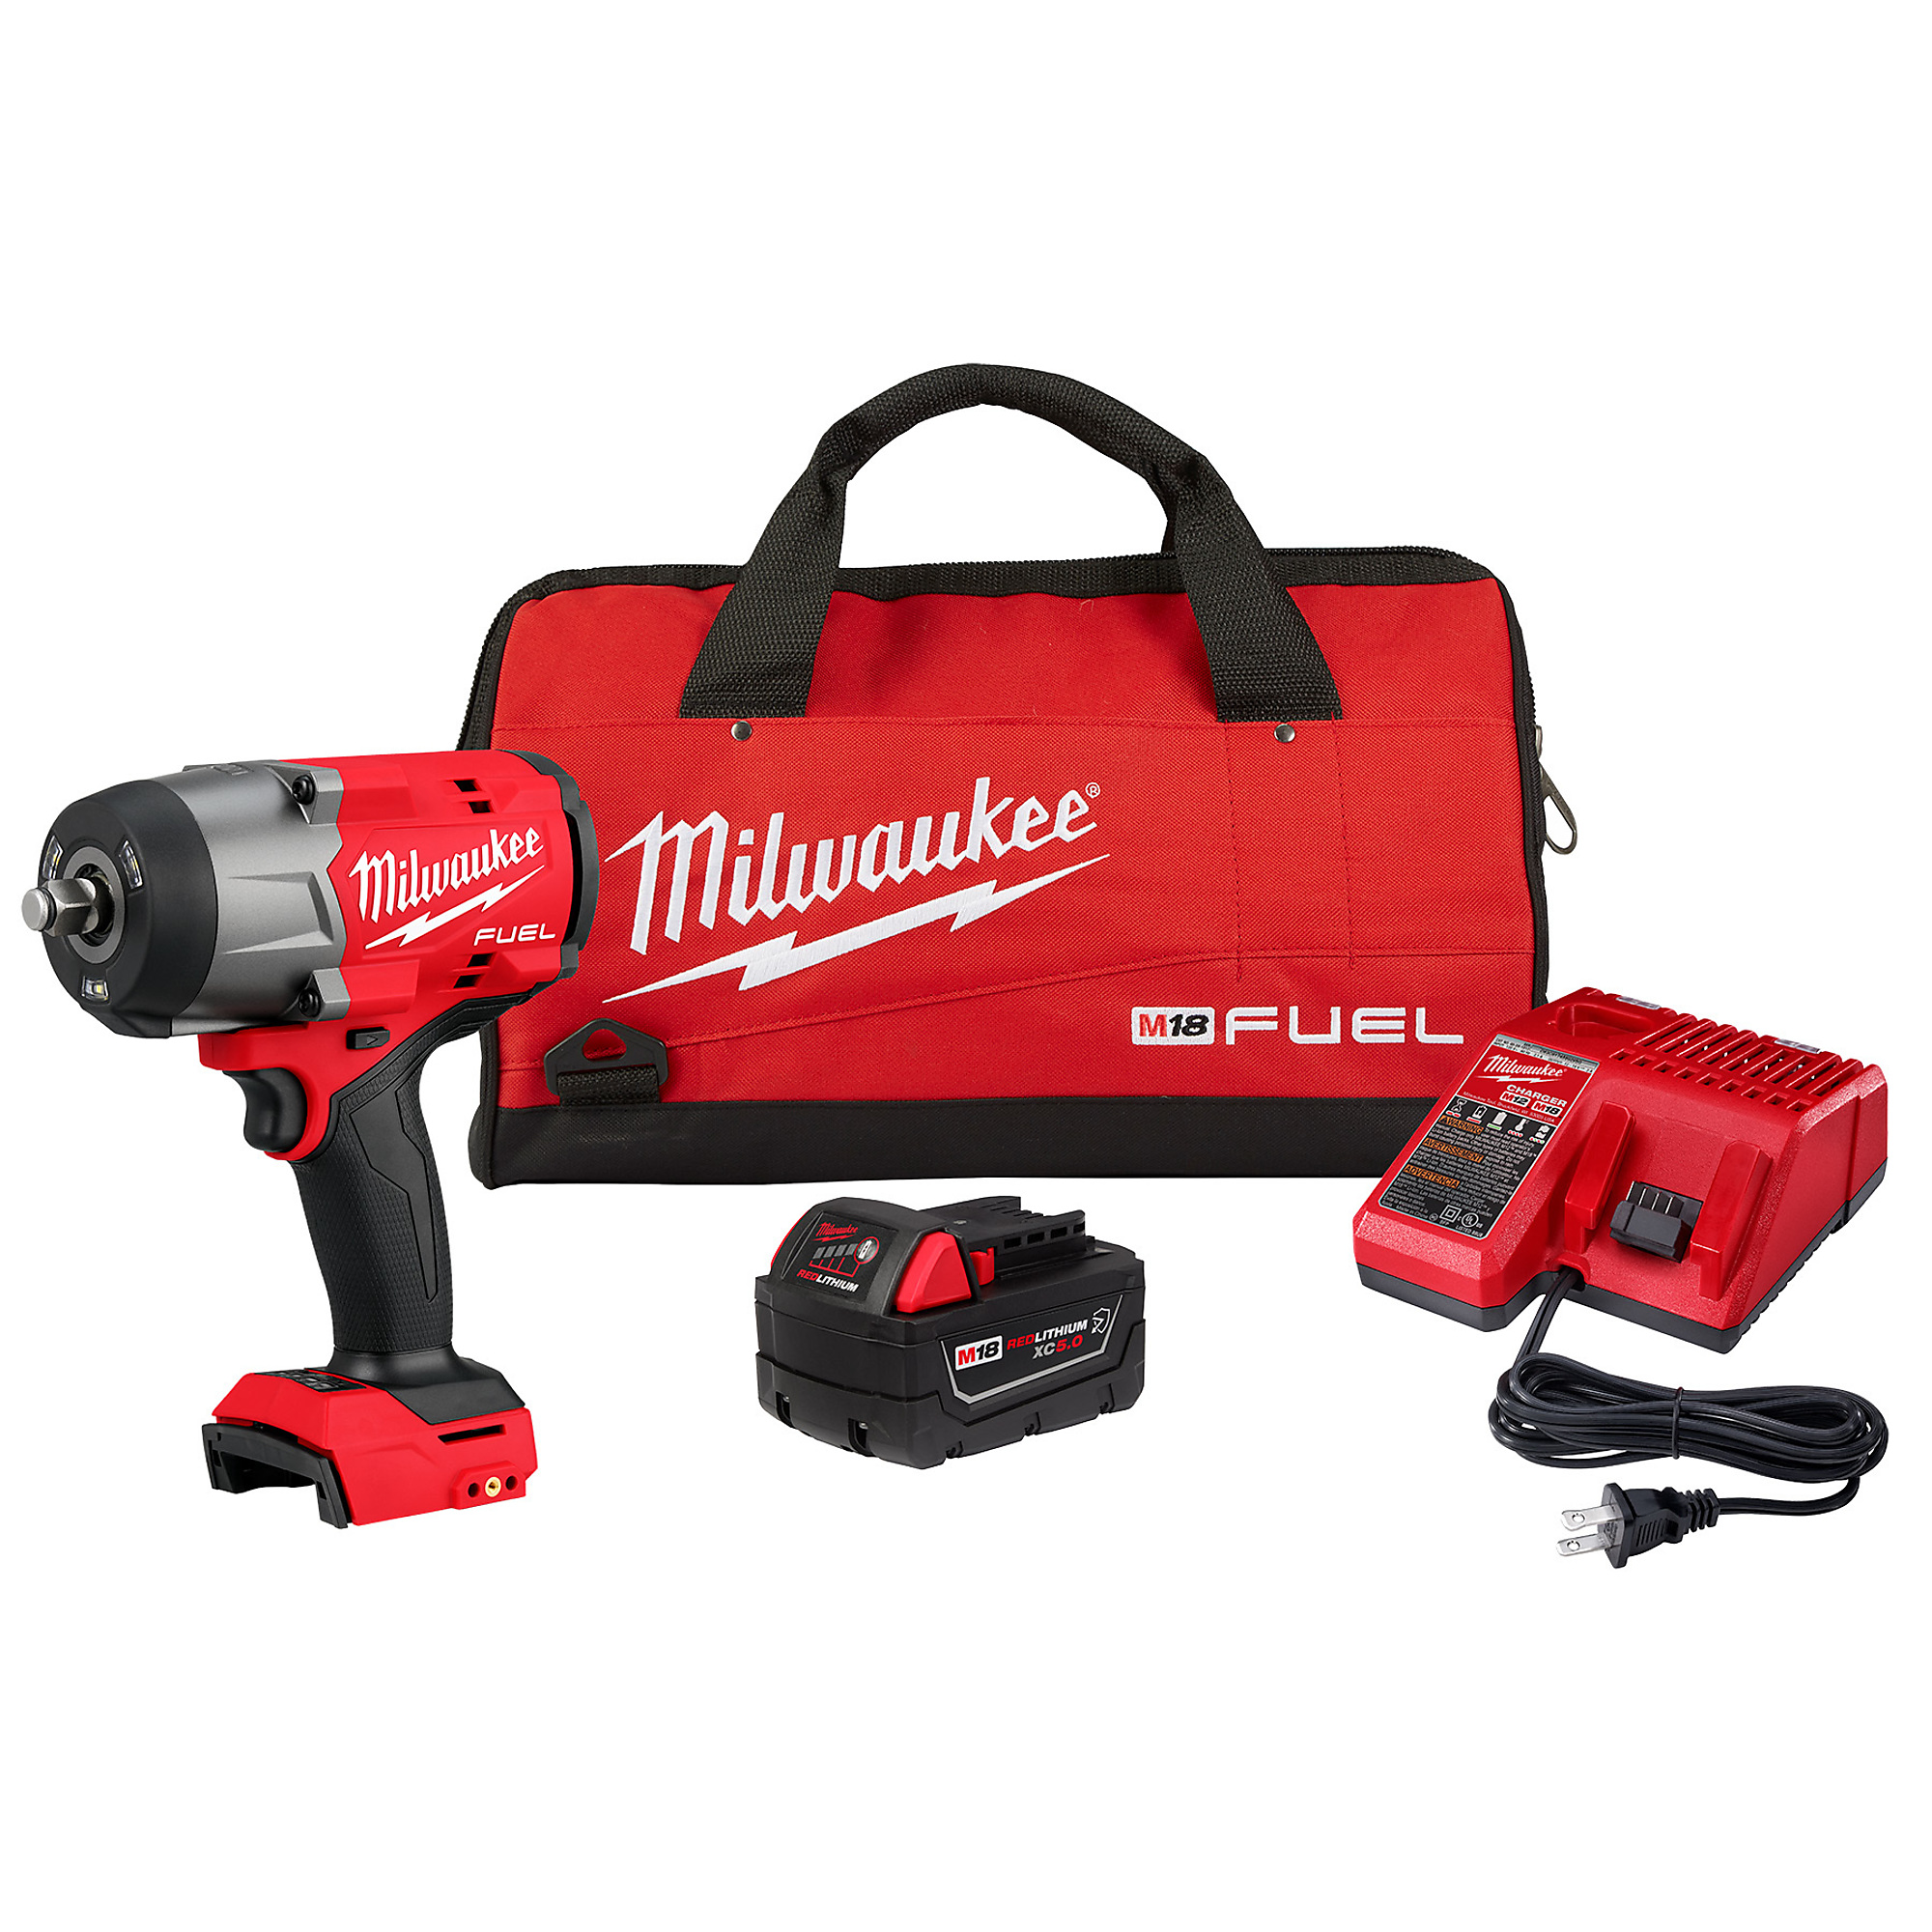 Milwaukee, M18 1/2in. High Torque Impact Wrench FrictRingKit, Drive Size  1/2 in, Volts 18 Battery Type Lithium-ion, Model# 2967-21B Northern Tool